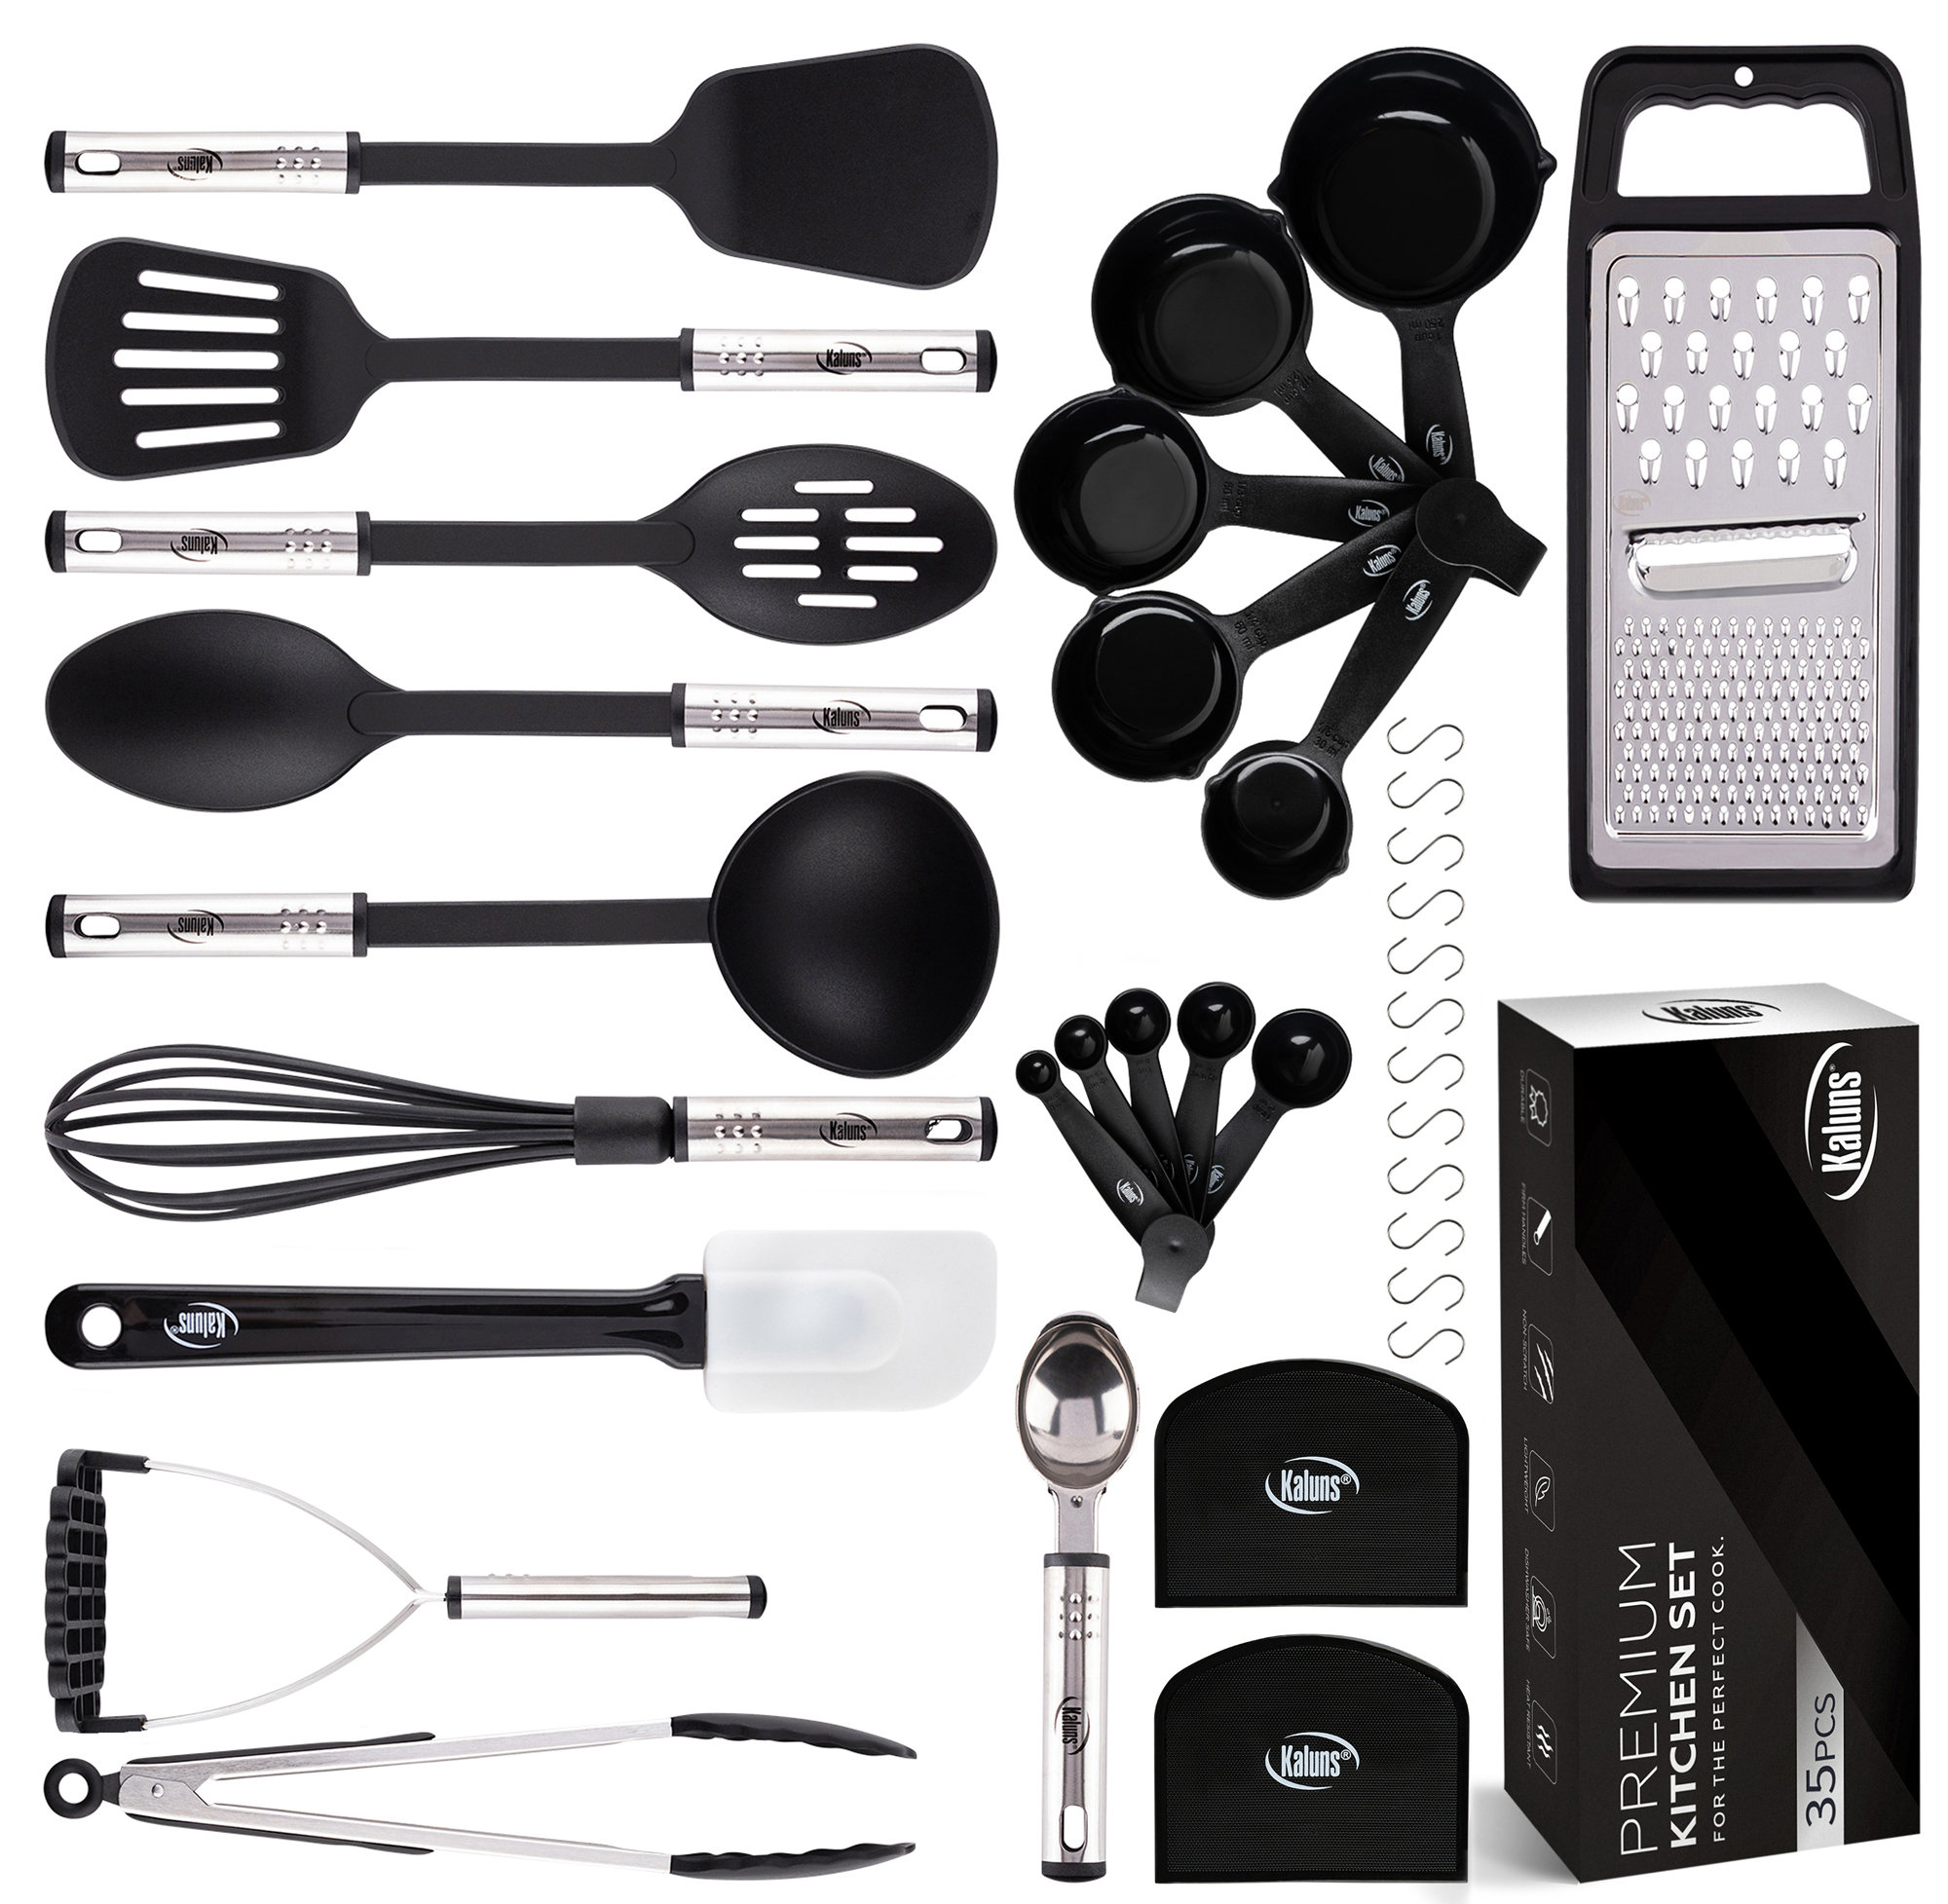 Kaluns Kitchen Utensil Set - 24 Nylon Stainless Steel Cooking Supplies - Non-Stick and Heat Resistant Cookware Set - Cooking Utensils, Size: 24 Pcs